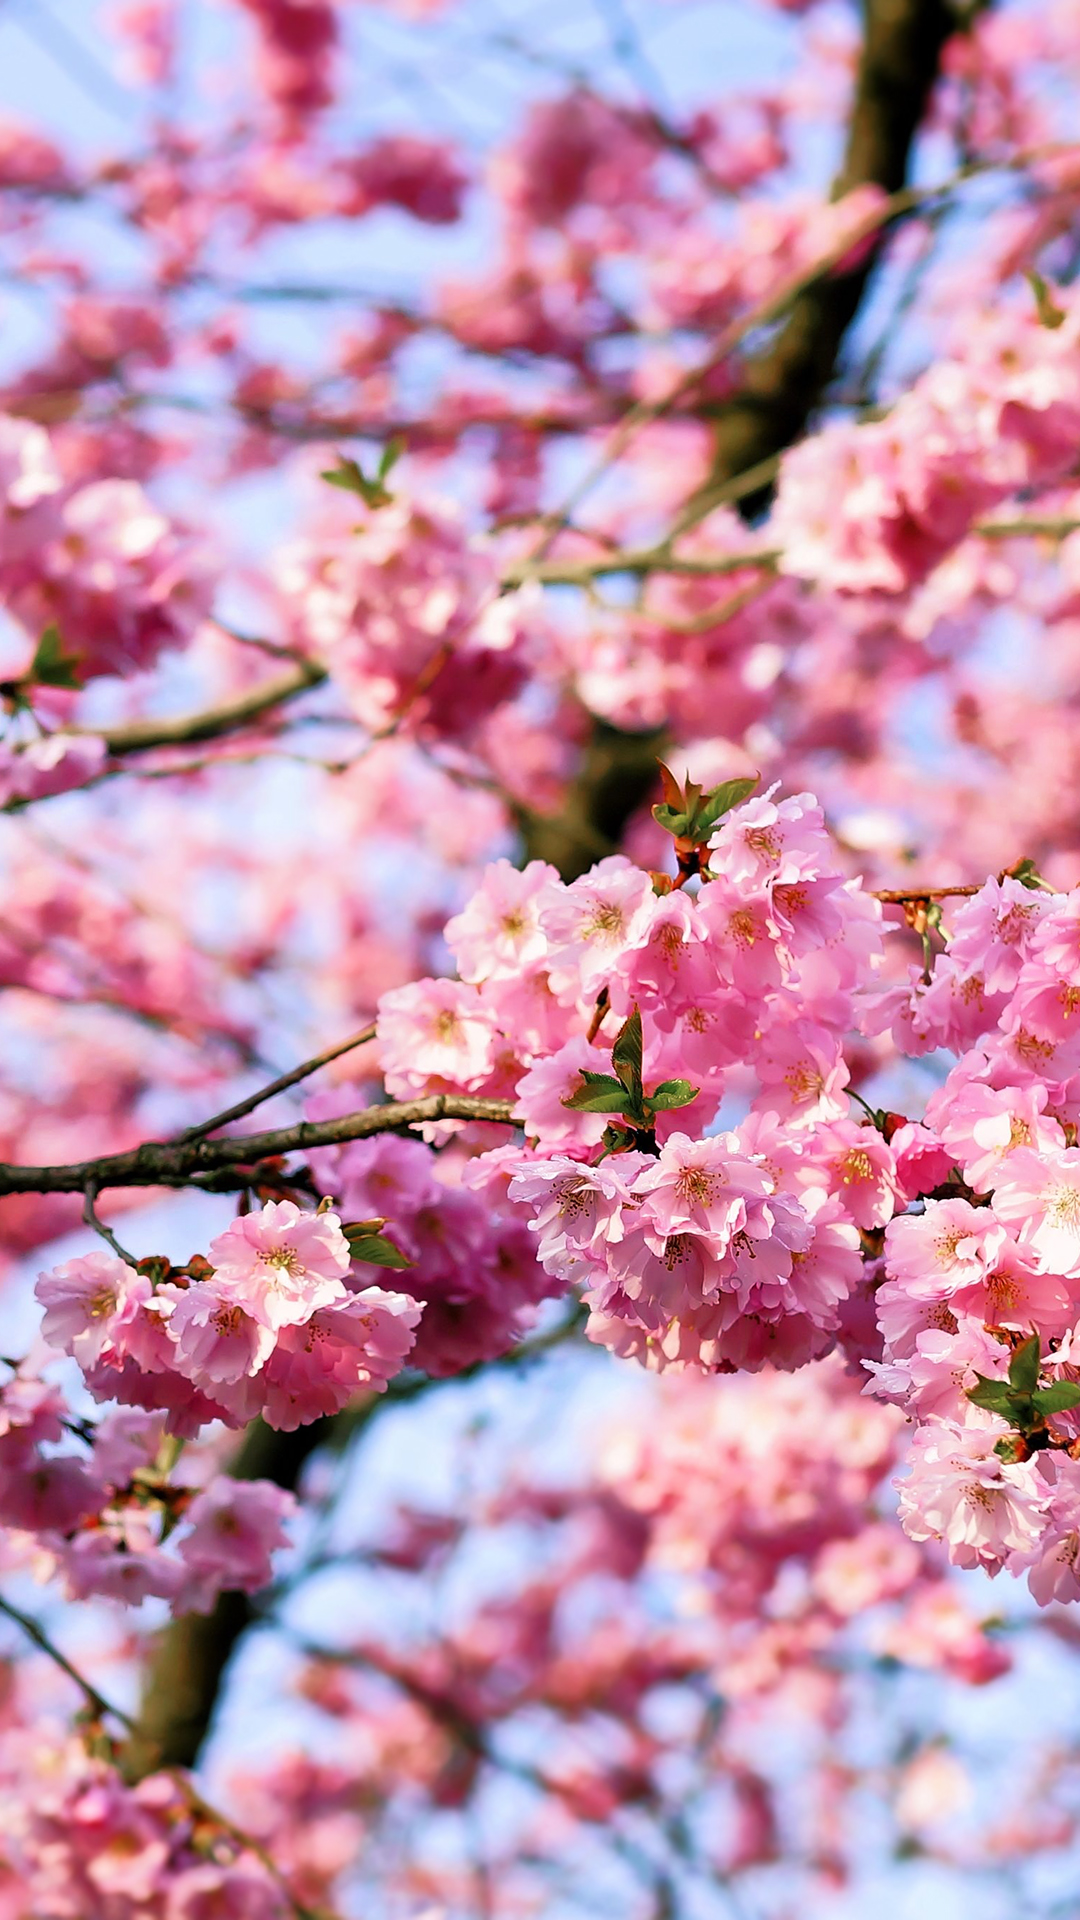 iPhone Wallpaper. Flower, Blossom, Spring, Pink, Plant, Cherry